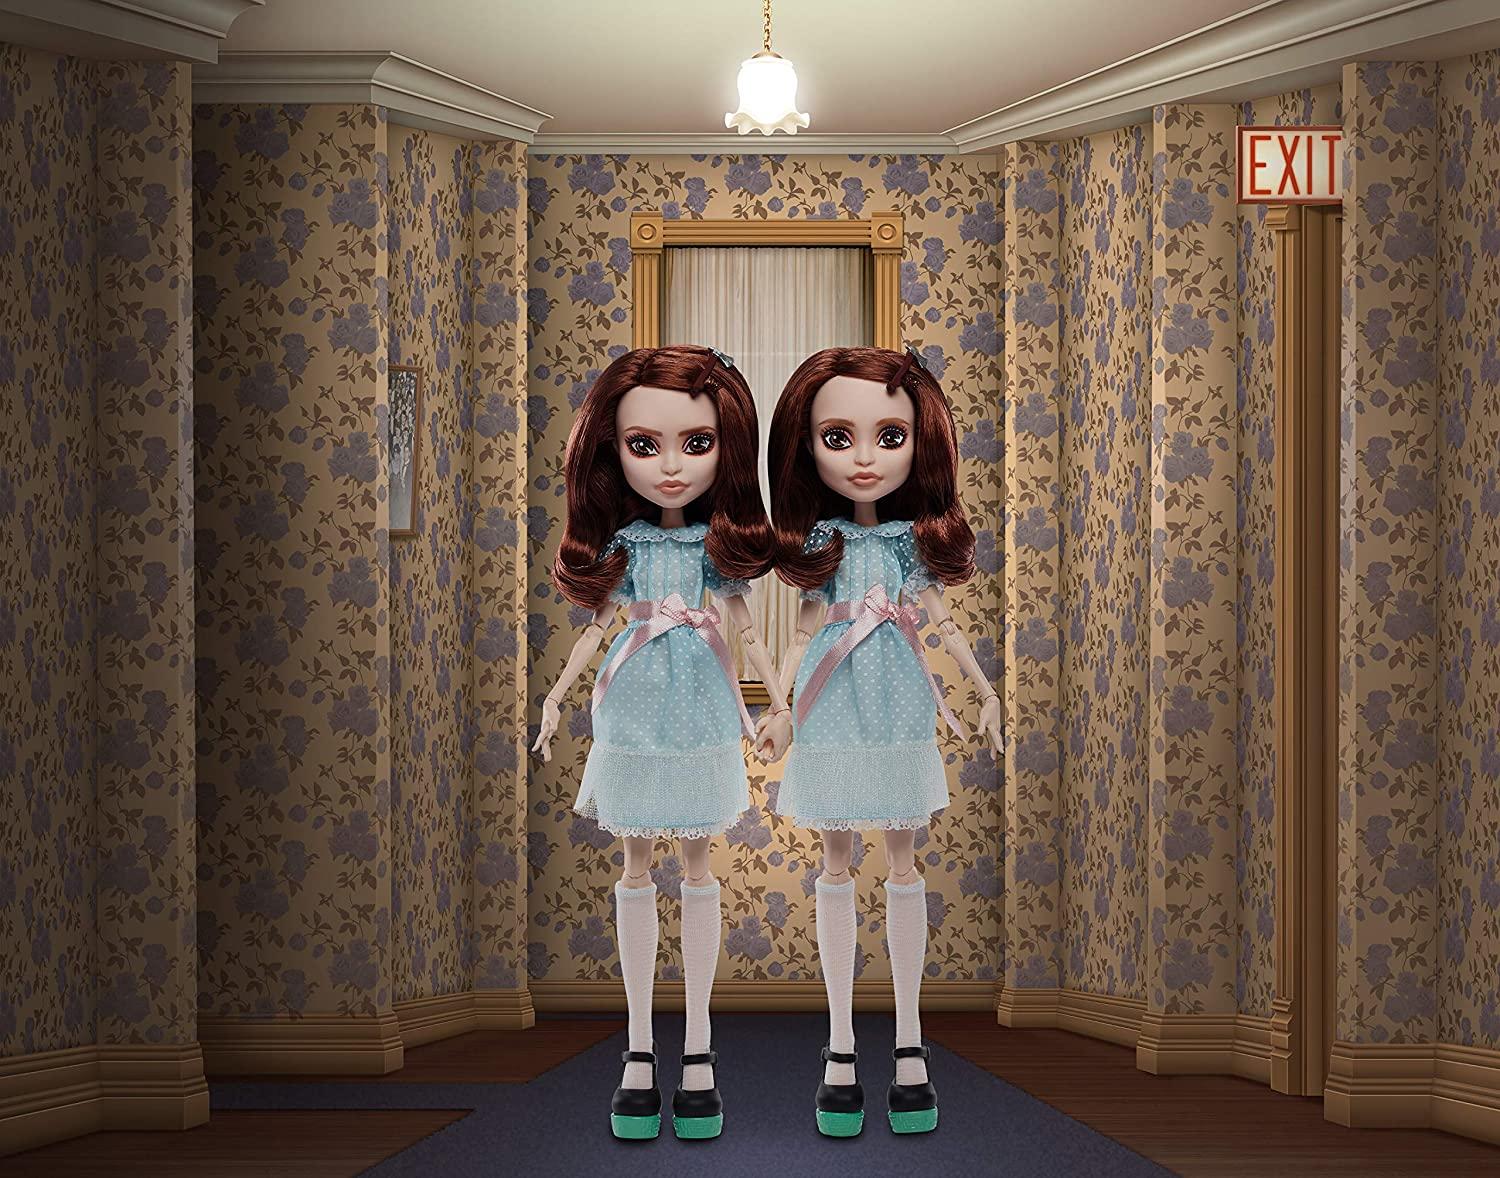 Monster High The Shining Grady Twins Collector Doll 2-Pack, 2 Collectible Dolls (10-inch) in Fashions and Film-Inspired Accessories, with Doll Stands,